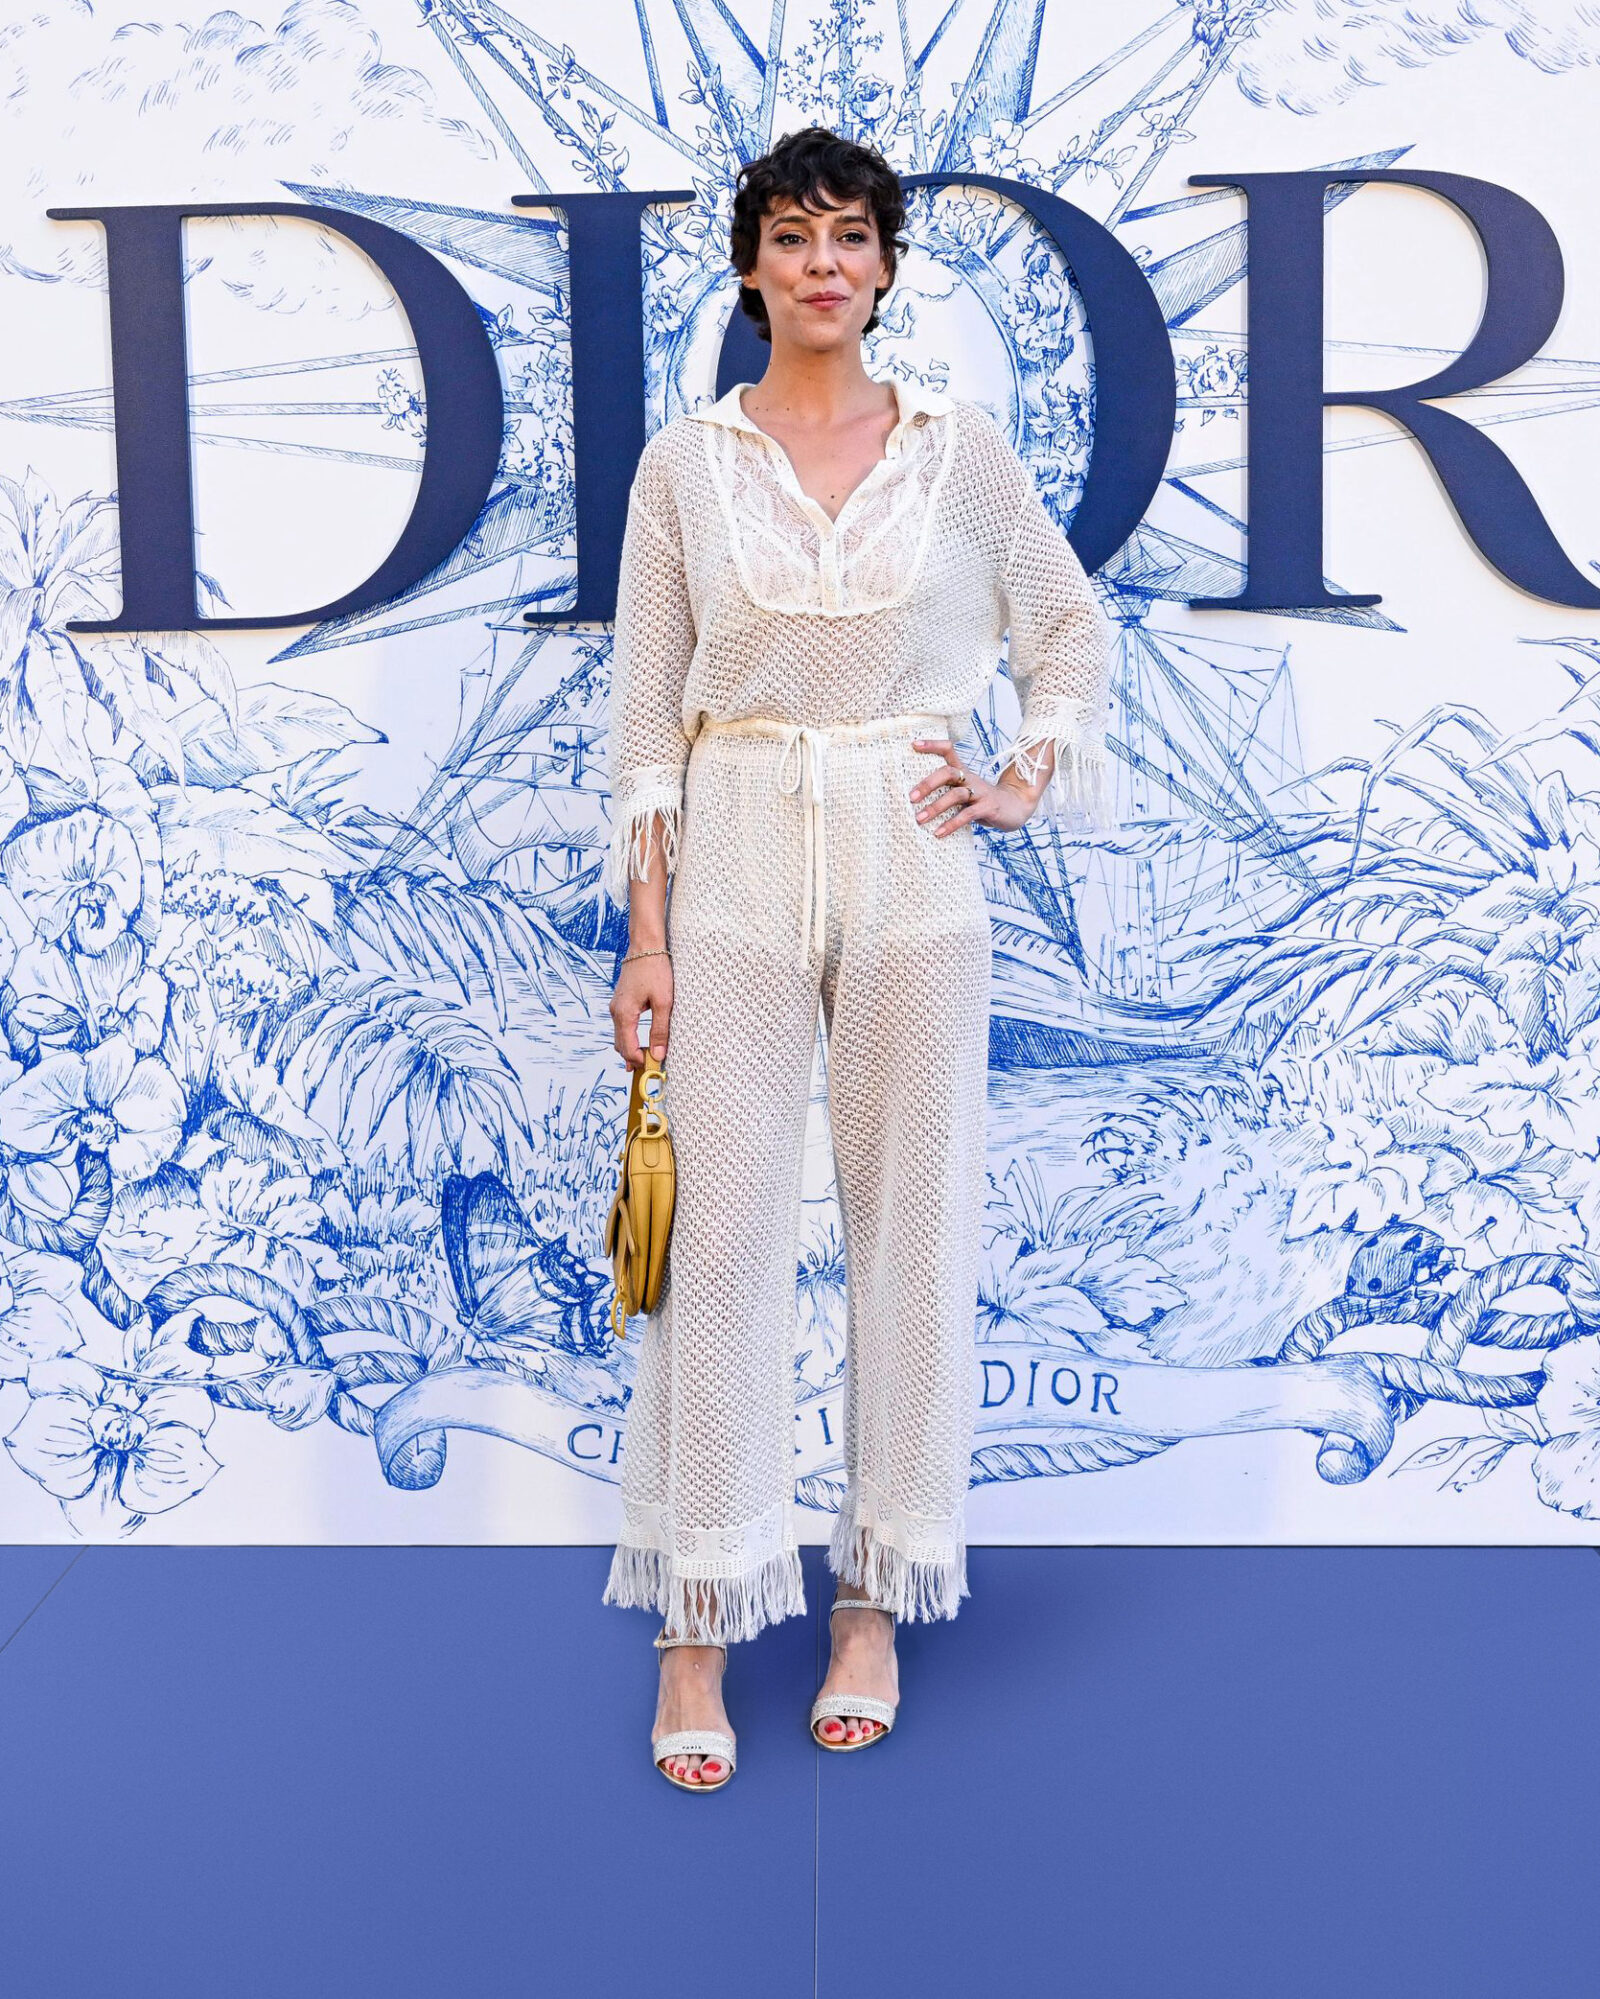 SEVILLE, SPAIN - JUNE 16: Belen Cuesta attends &quot;Crucero Collection&quot; fashion show presentation by Dior at Plaza de España on June 16, 2022 in Seville, Spain. (Photo by Carlos Alvarez/Getty Images for Dior)